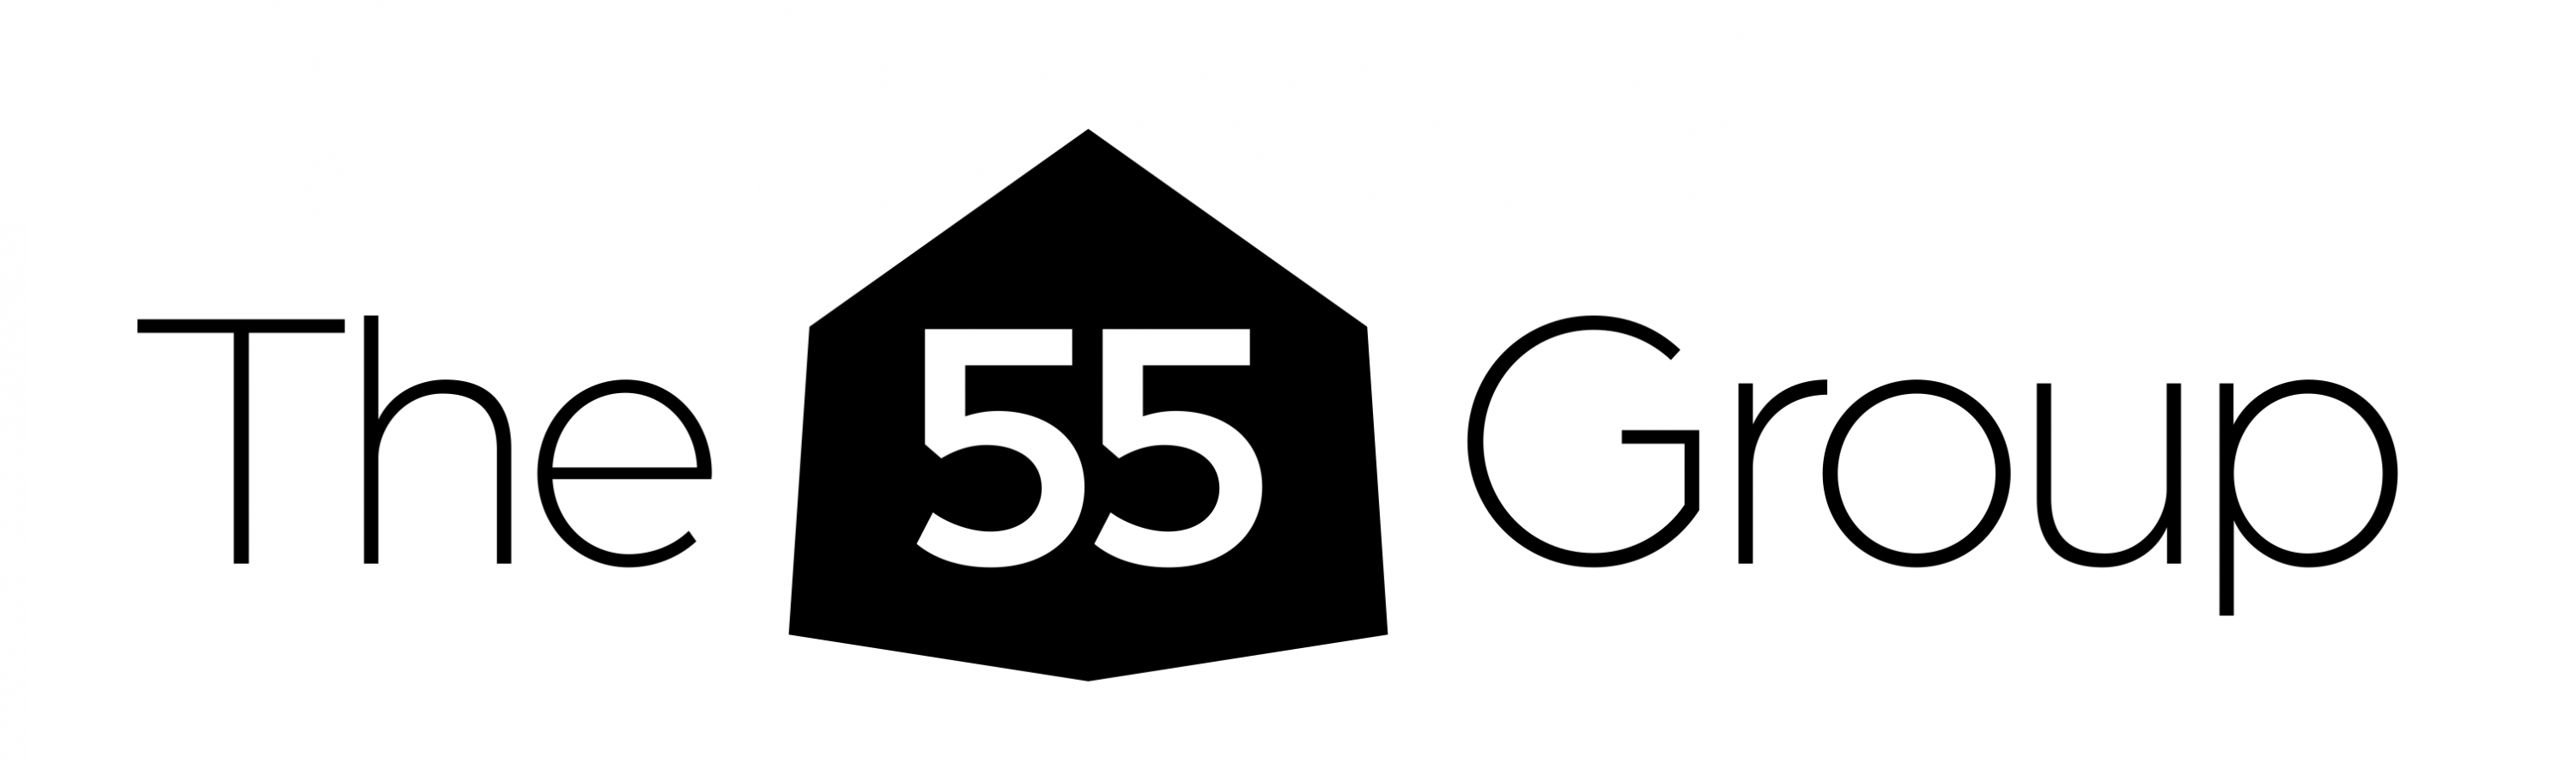 logo for The 55 Group